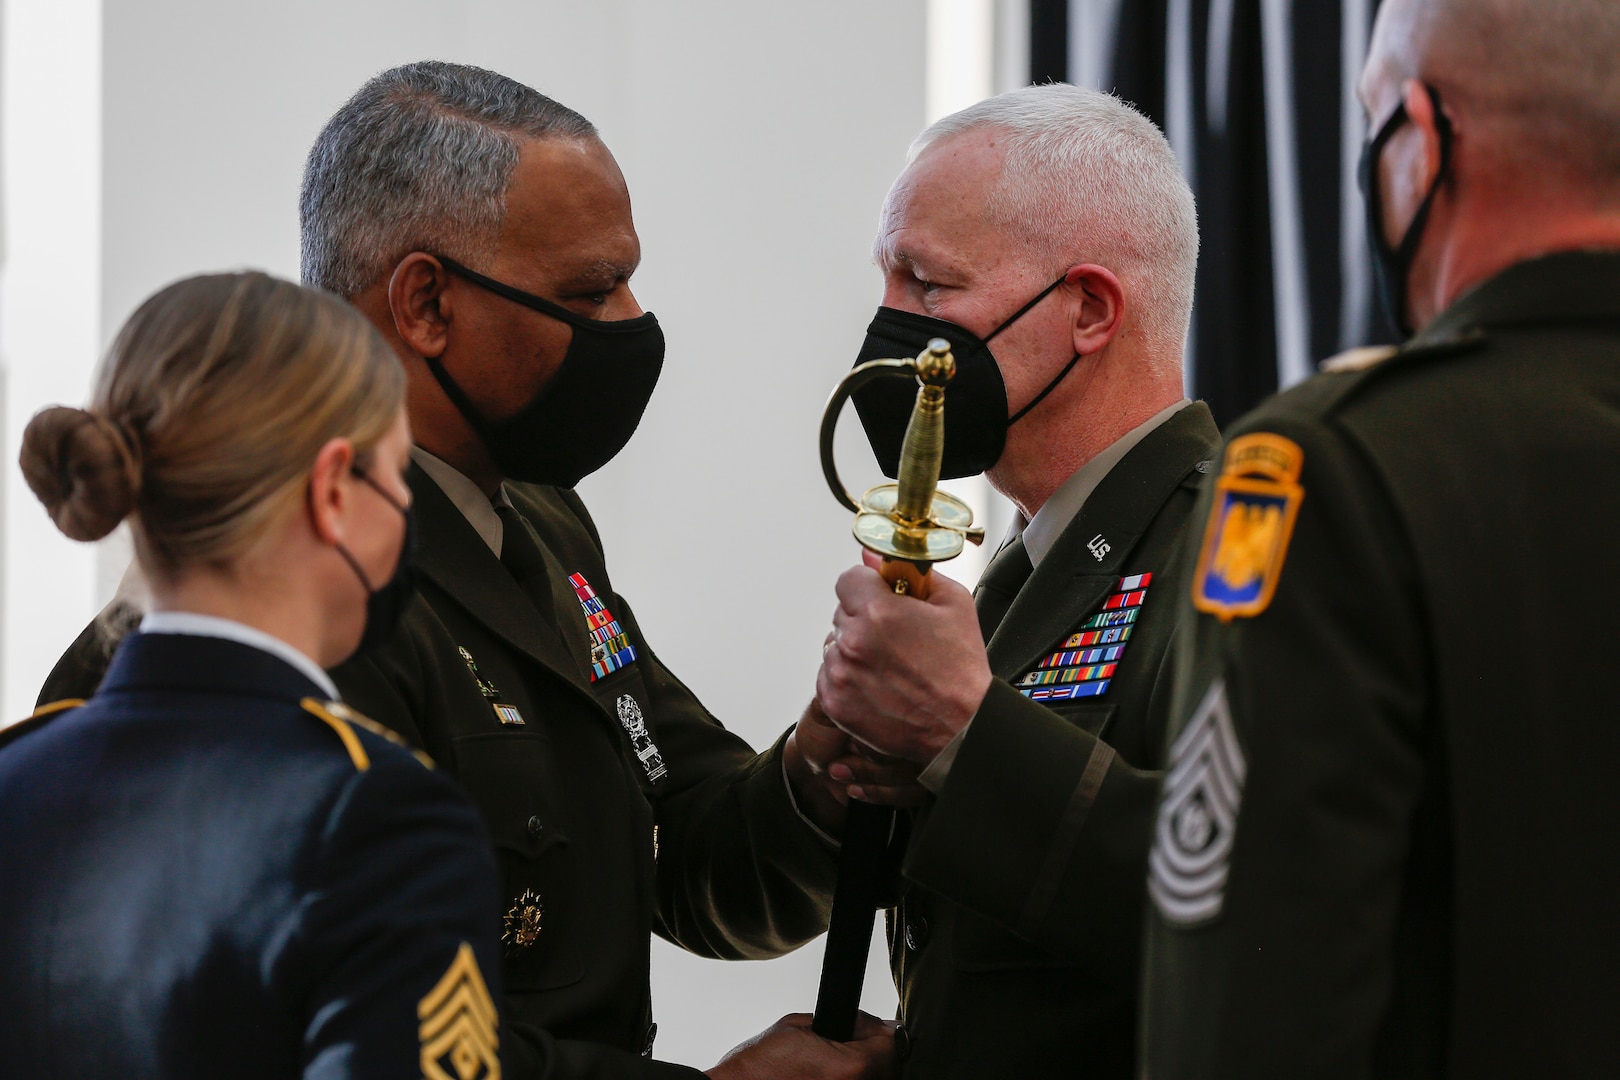 Command Sgt. Maj. John Sampa returns the sword of the noncommissioned officer to Lt. Gen. Jon Jensen, the director of the Army National Guard, signifying Sampa’s relinquishment as the Army Guard’s top senior enlisted member during a change of responsibility ceremony at the Herbert R. Temple Army National Guard Readiness Center, Arlington, Va., Feb. 9, 2022.